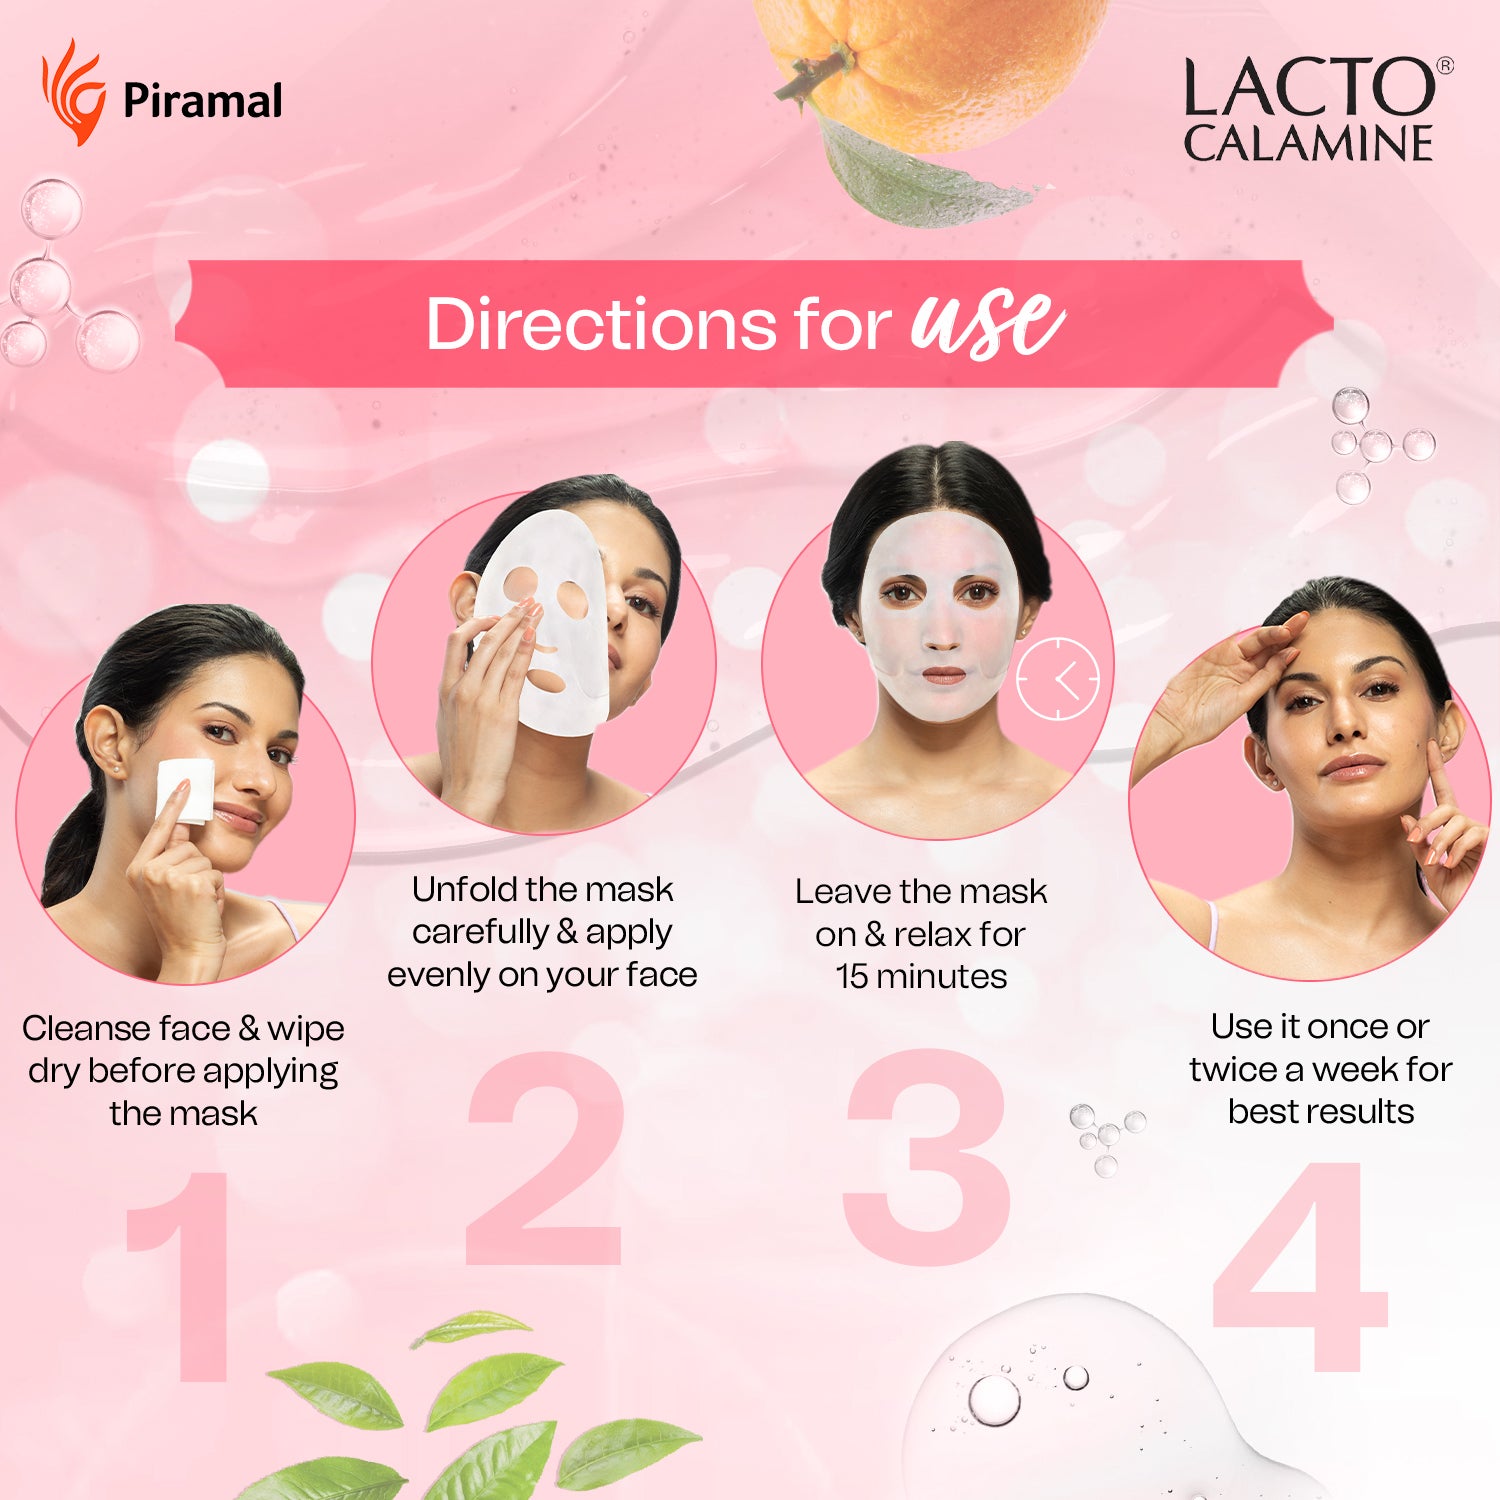 Lacto Calamine sheet mask directions to use